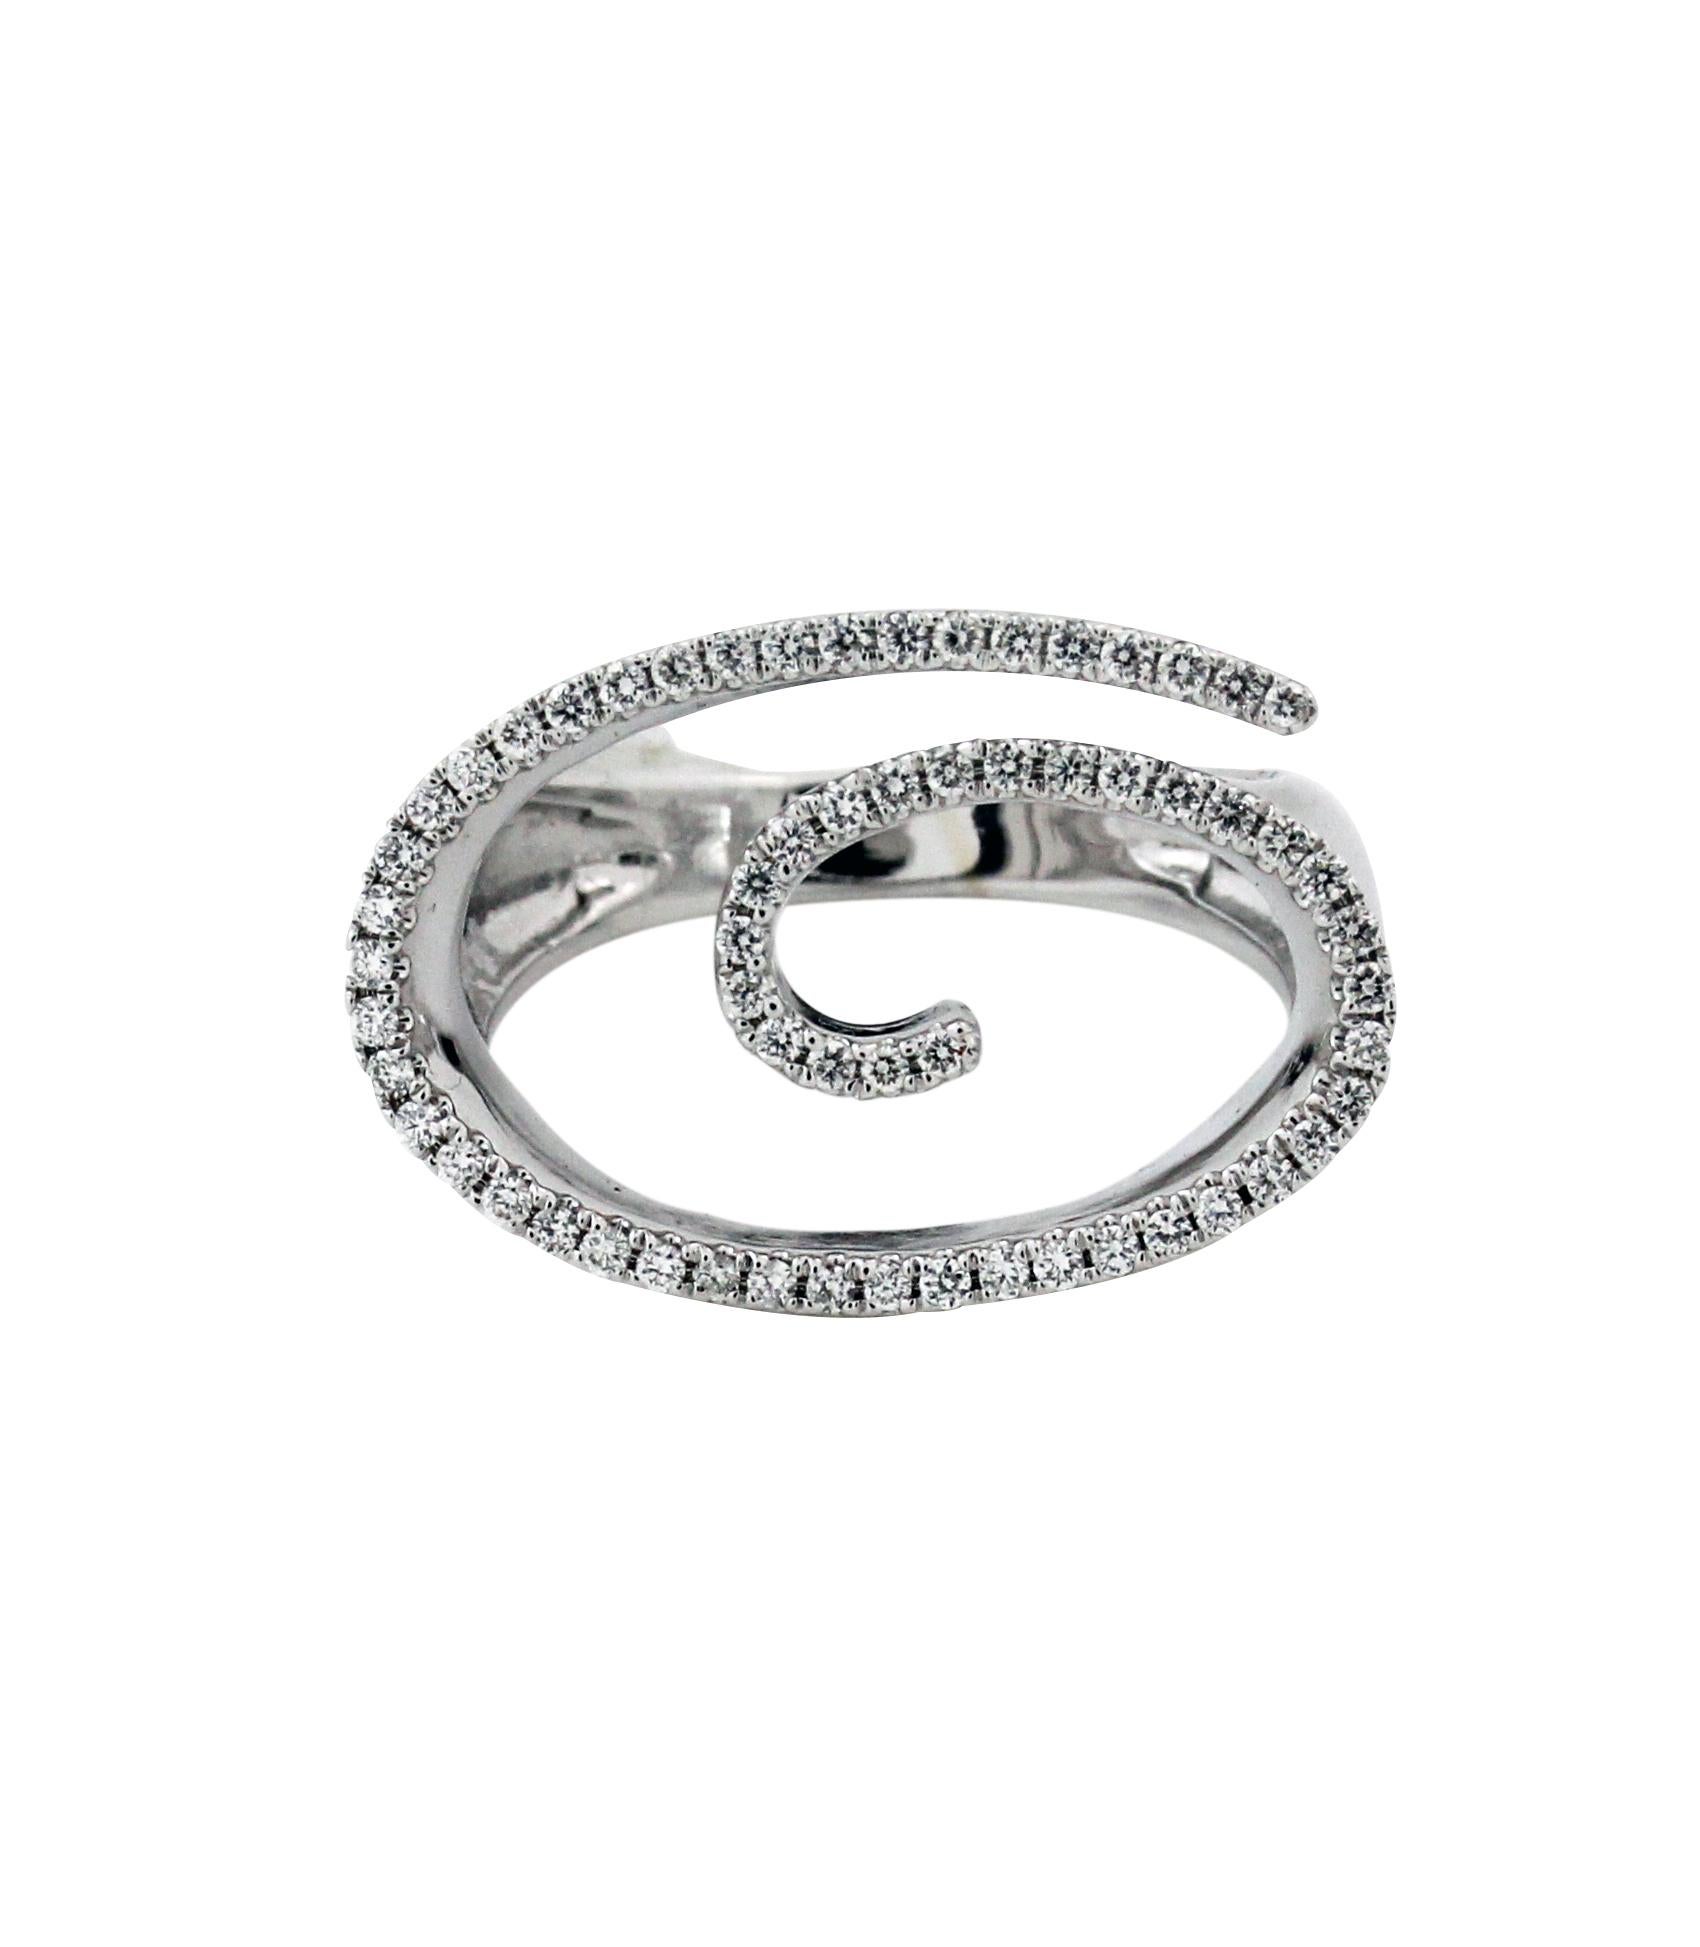 18K White Gold and Diamond Spiral Center Ring with High-Polish Finish
0.33 carat G color, VS clarity diamonds
8.20 grams 18K gold  
15mm Face length / 5mm band width
Size 6.5. Sizable.
Made in USA by ORO Couture (Boca Raton, FL)
